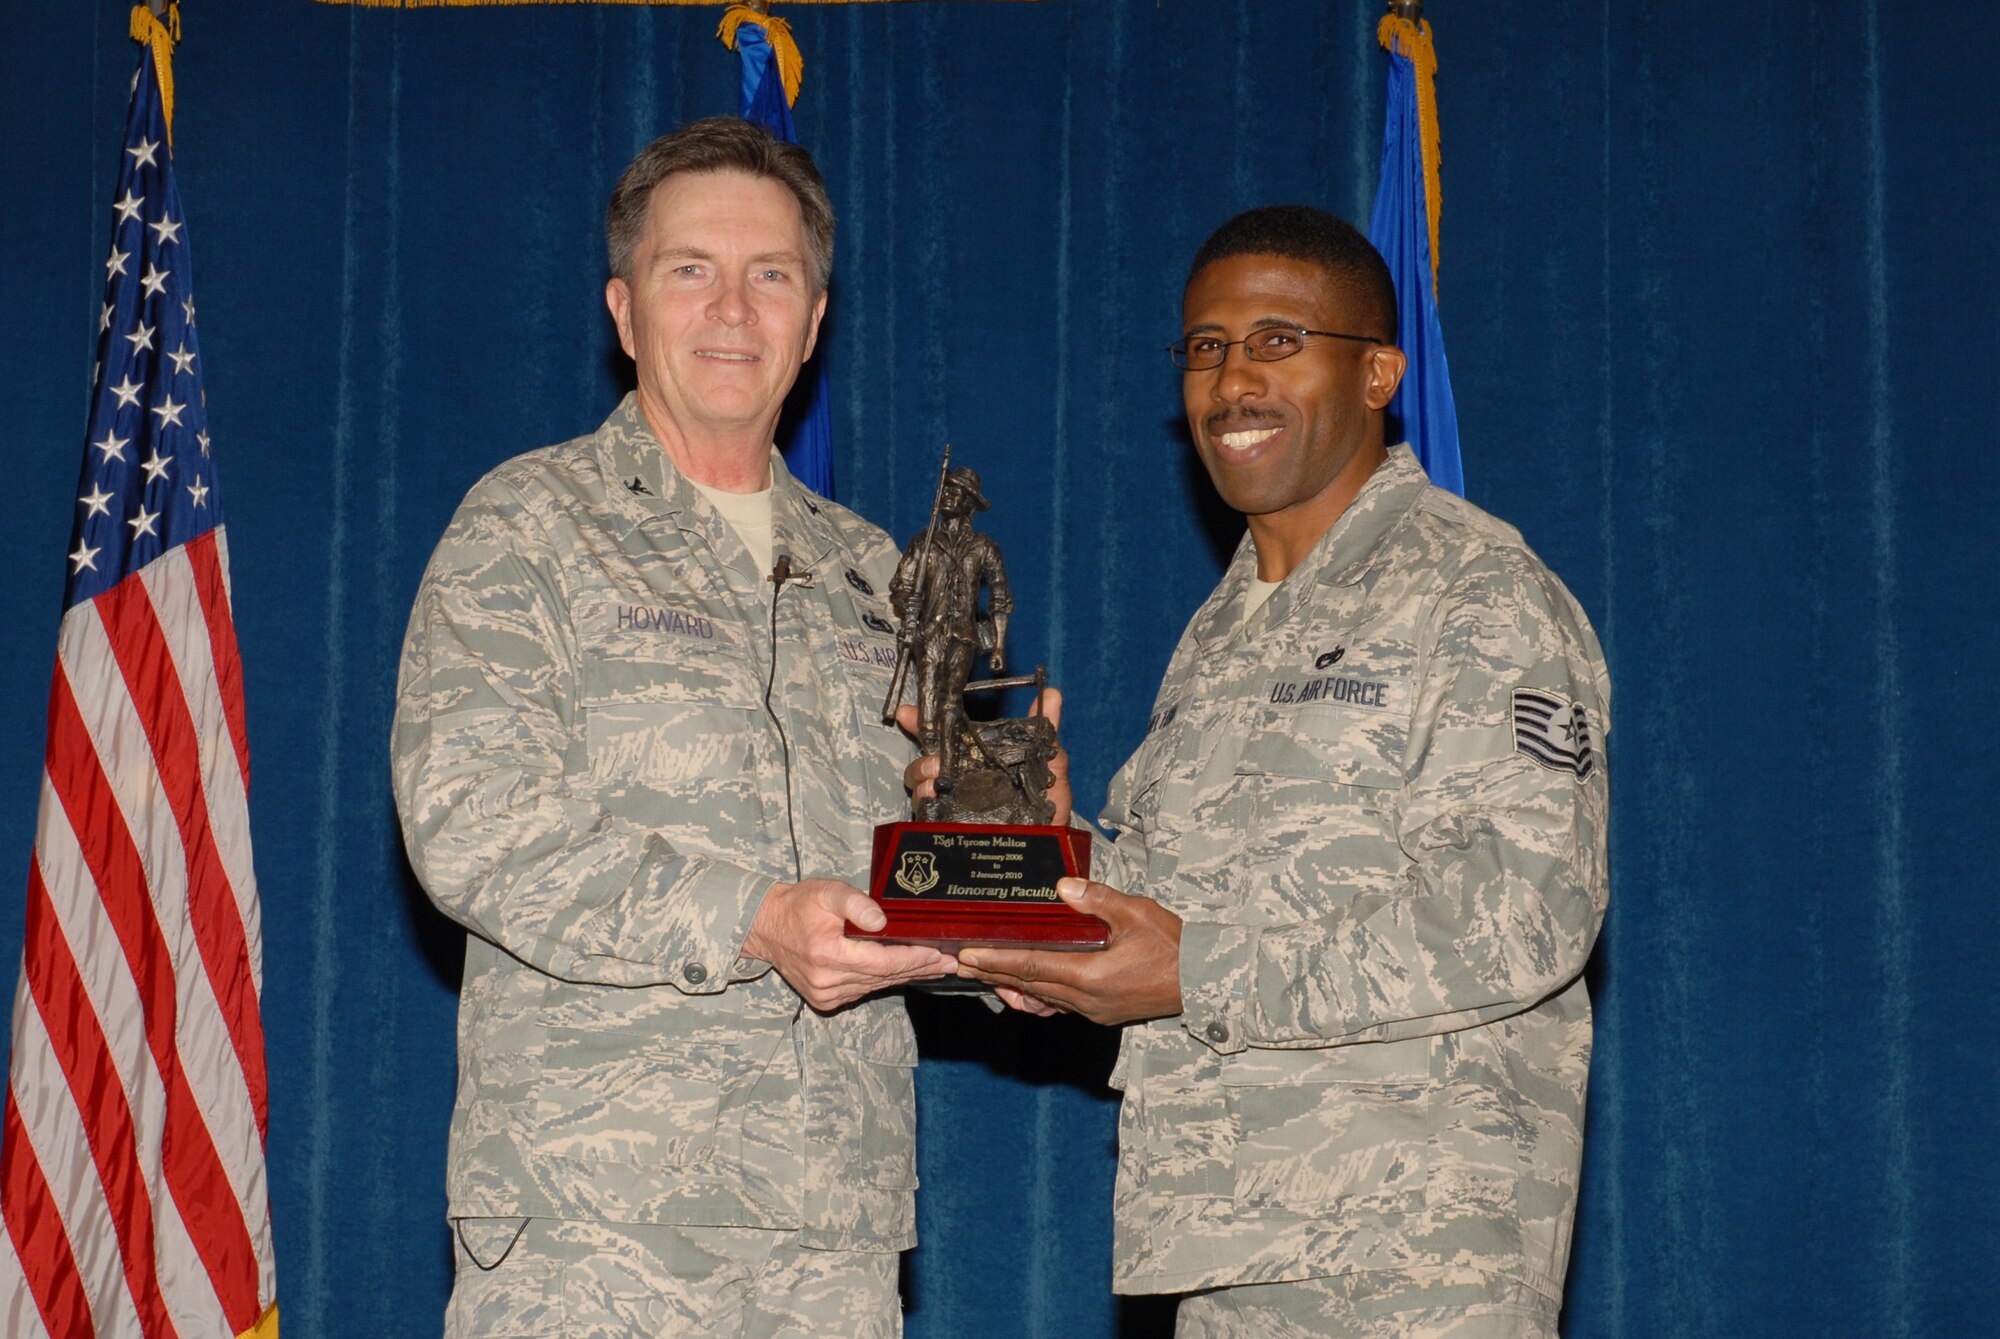 McGHEE TYSON AIR NATIONAL GUARD BASE, Tenn. -- Tech. Sgt. Tyrone E. Melton, right, an enlisted professional military education instructor, receives the honorary faculty award from Col. Richard B. Howard, commander, upon his departure from assignment at The I.G. Brown Air National Guard Training and Education Center here, Dec. 18, 2009.  (U.S. Air Force photograph by Master Sgt. Mavi Smith/Released)